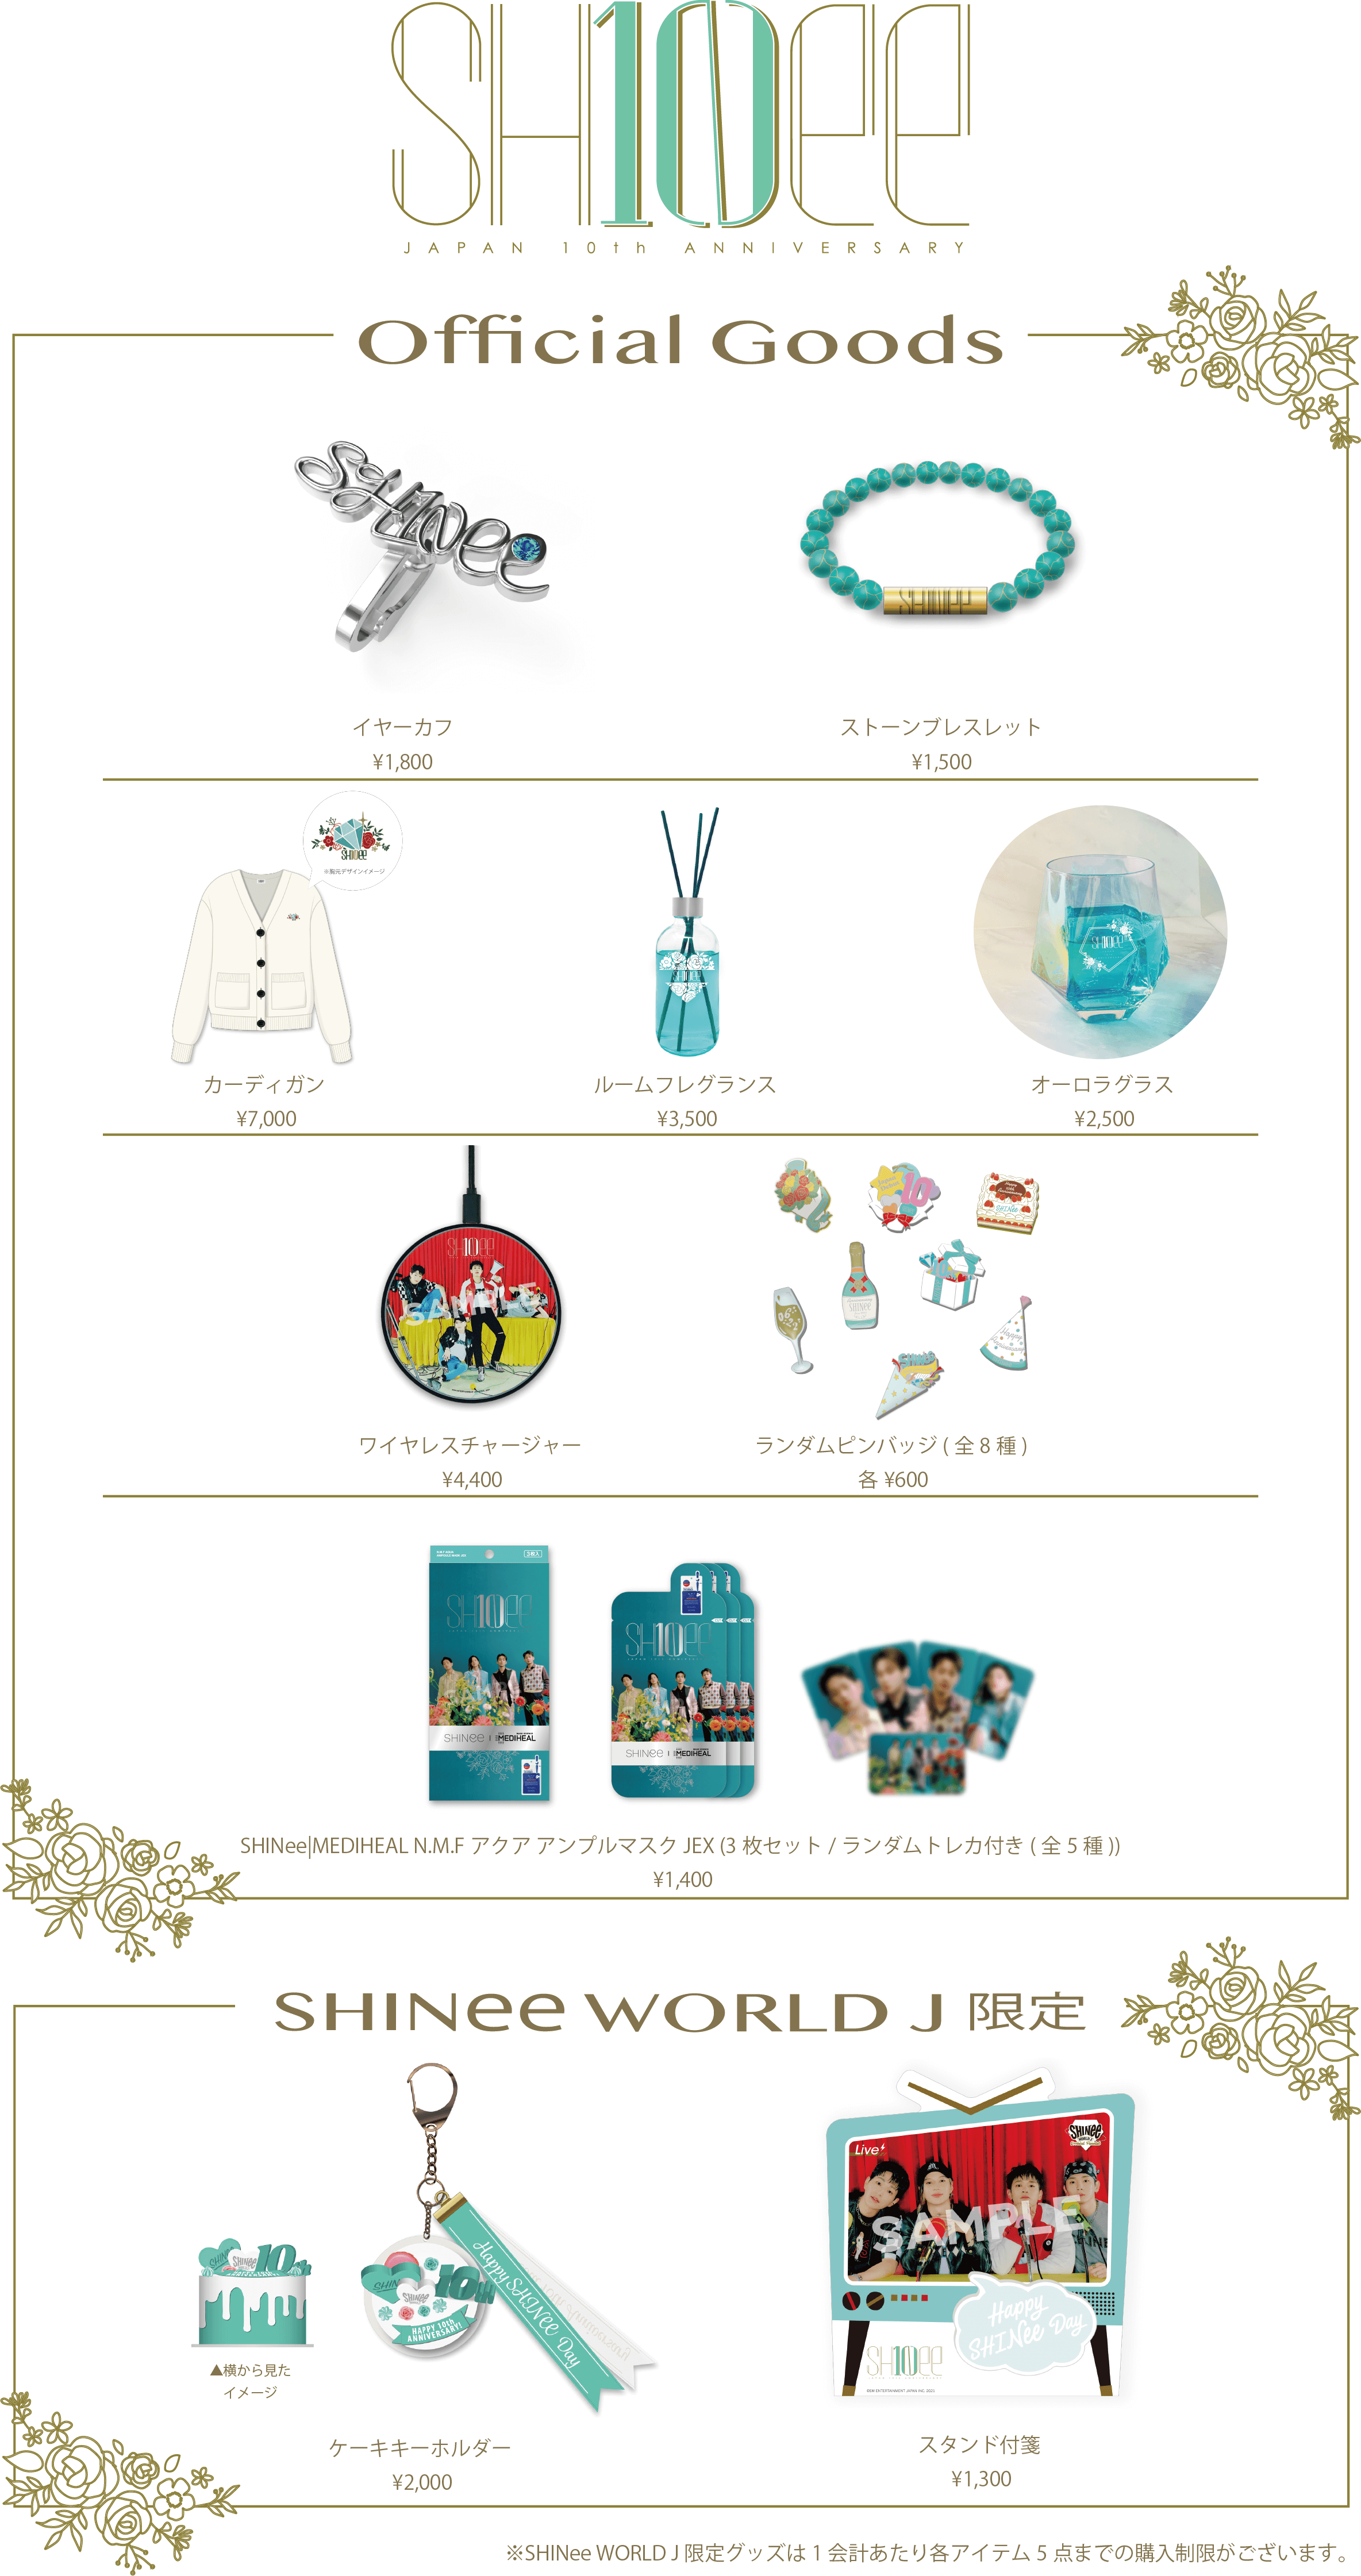 Shinee Japan Debut 10th Anniversaryグッズ受注販売のお知らせ Shinee Official Website